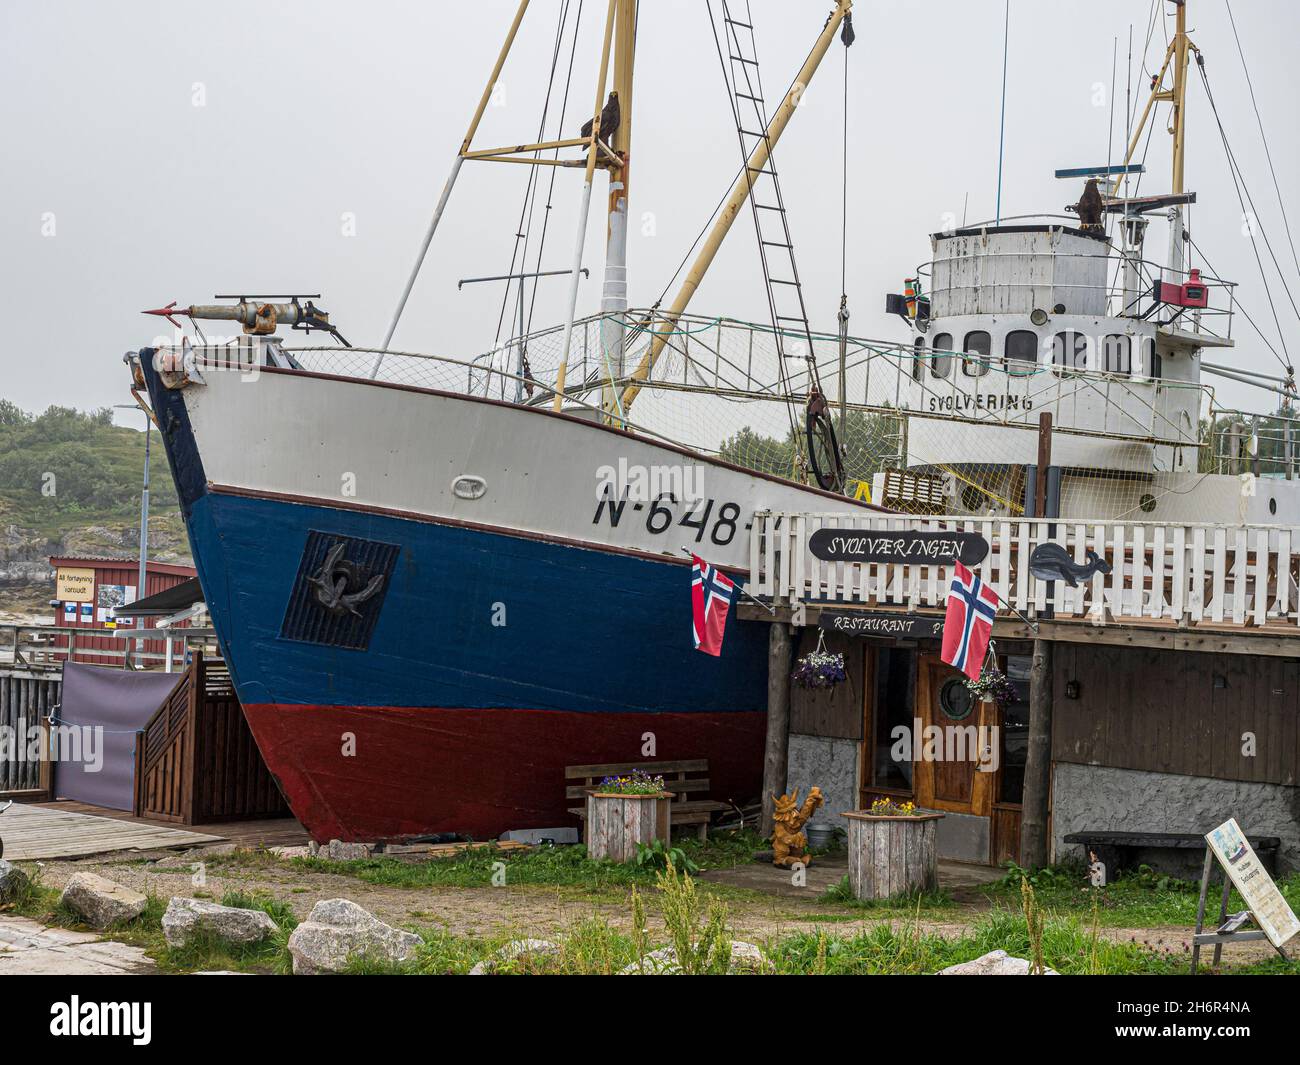 Former whale hunting boat converted to a restaurant, Tranoya, northern Norway south of Narvik. Stock Photo